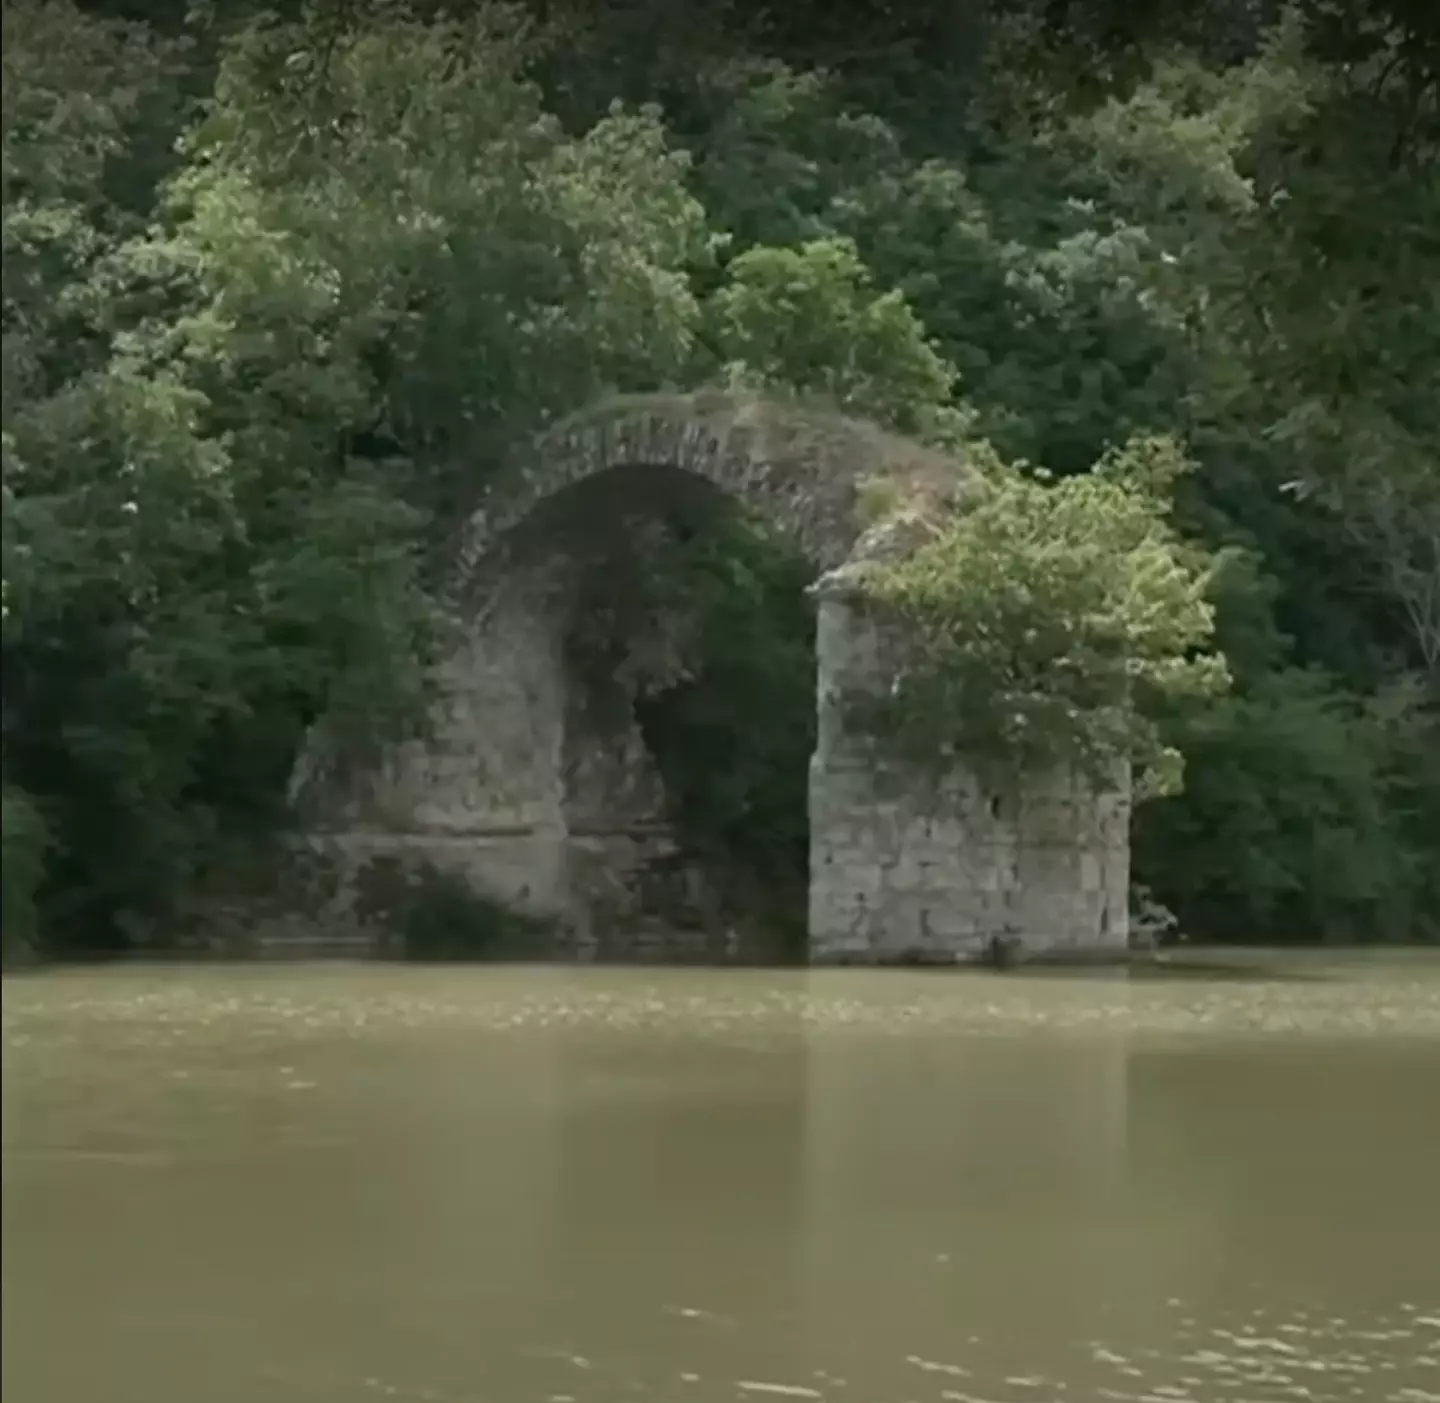 Sadly, the bridge has partially collapsed over the centuries.